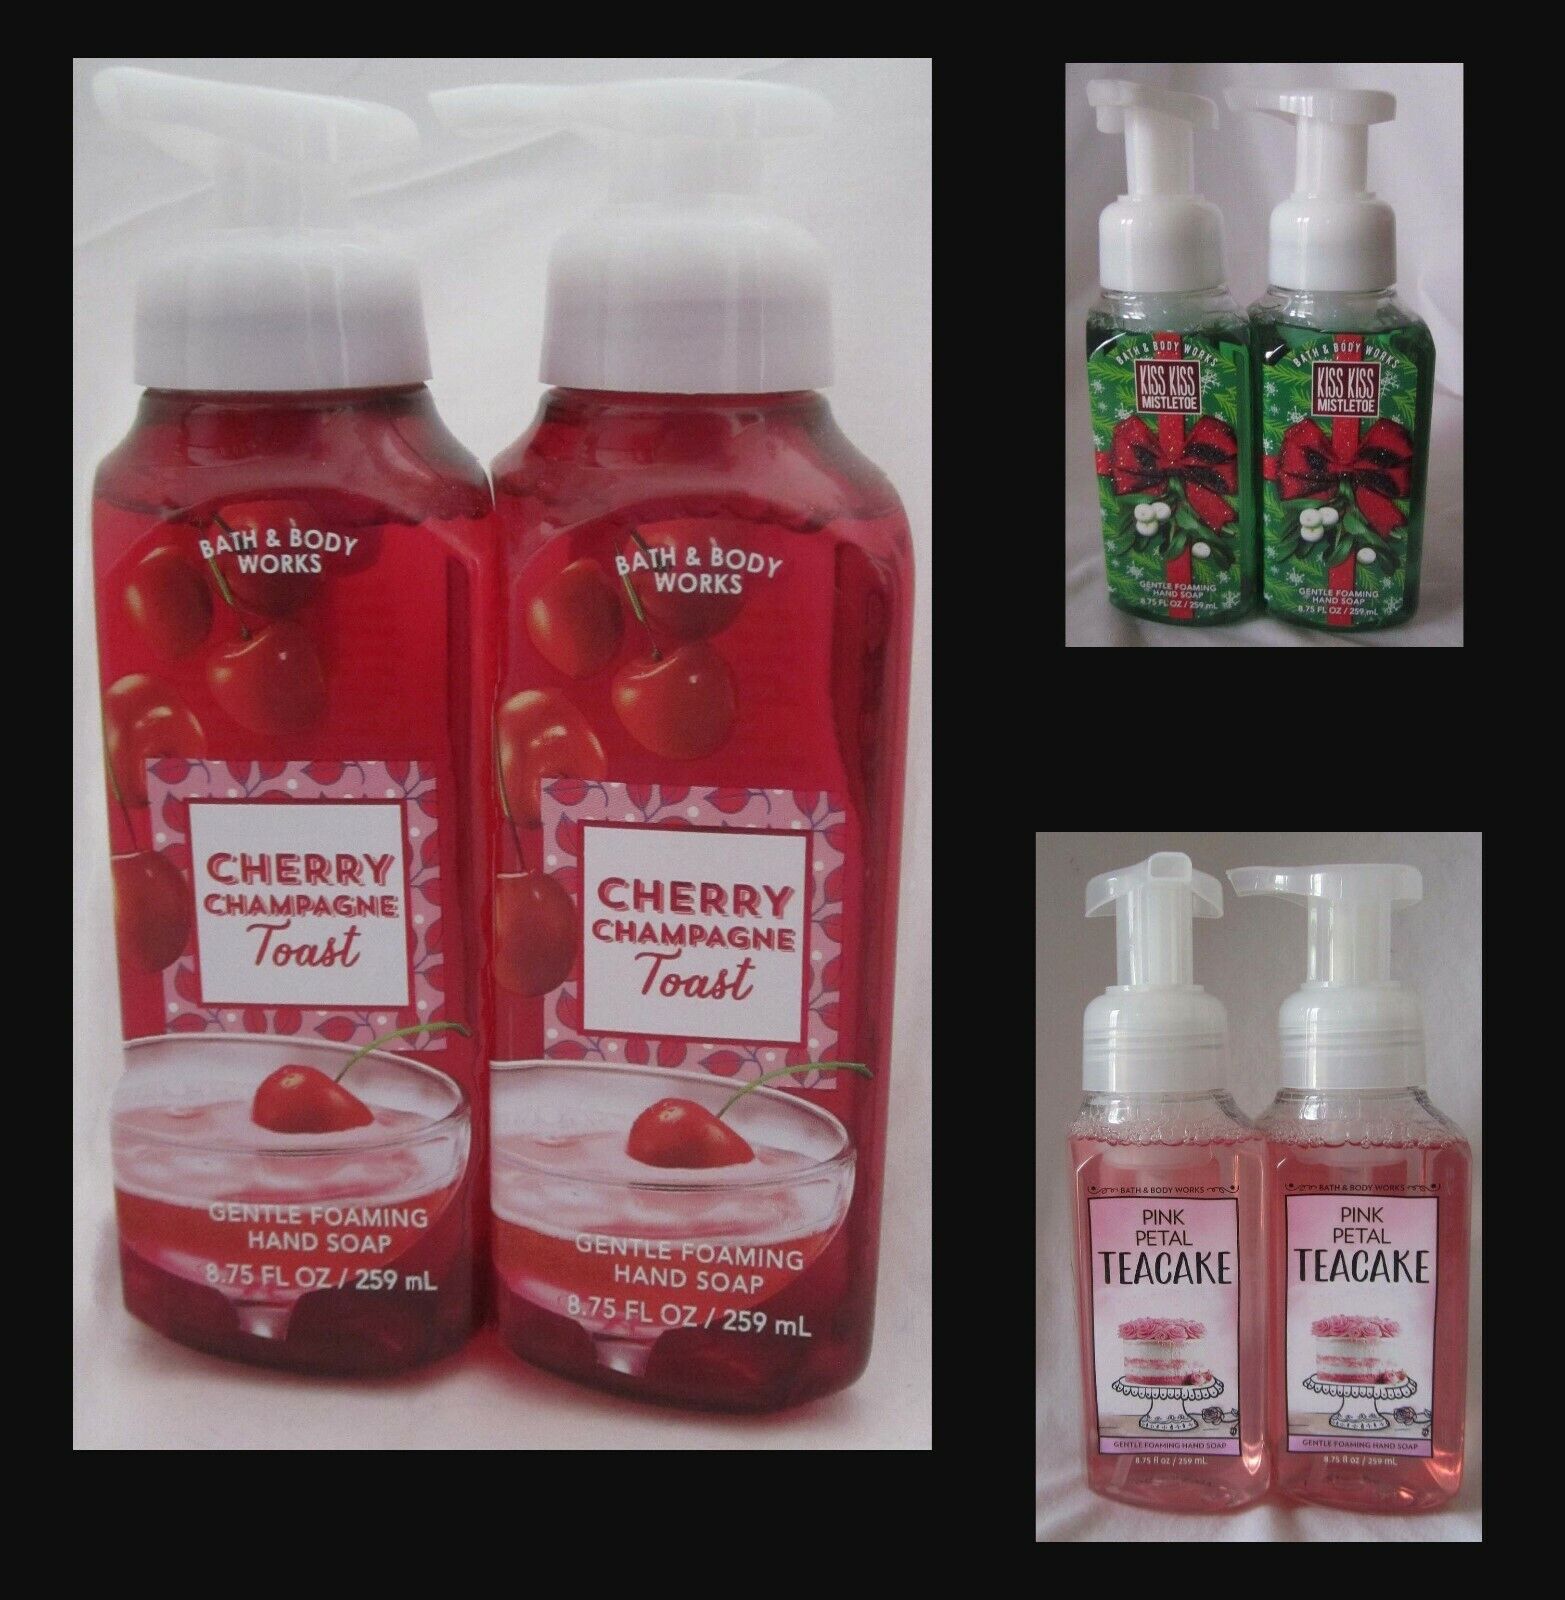 S Lot Of 2 Bath & And Body Works You Pick Scent